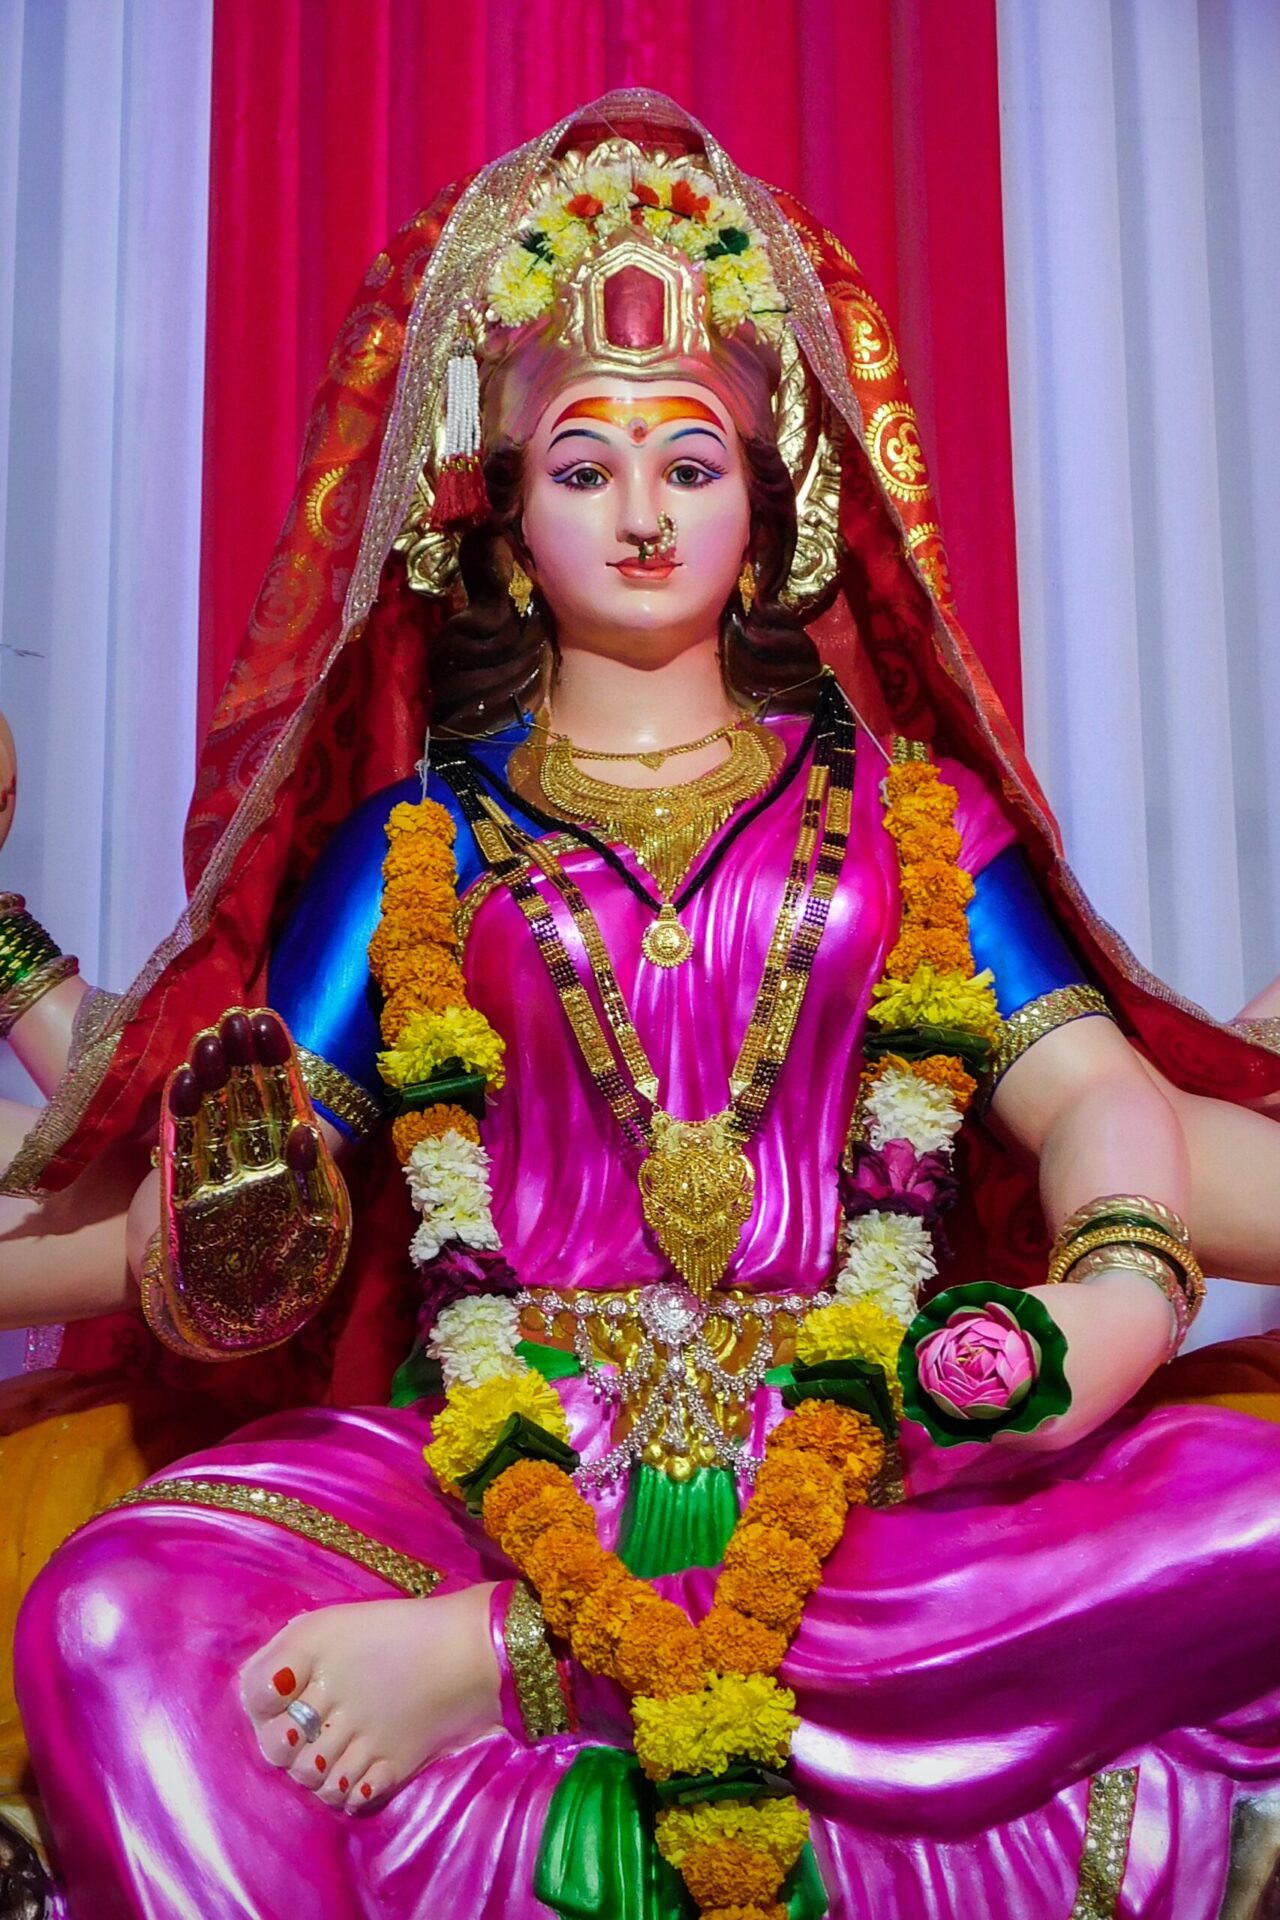 What Are The Different Names And Forms Of Hindu Gods And Goddesses?